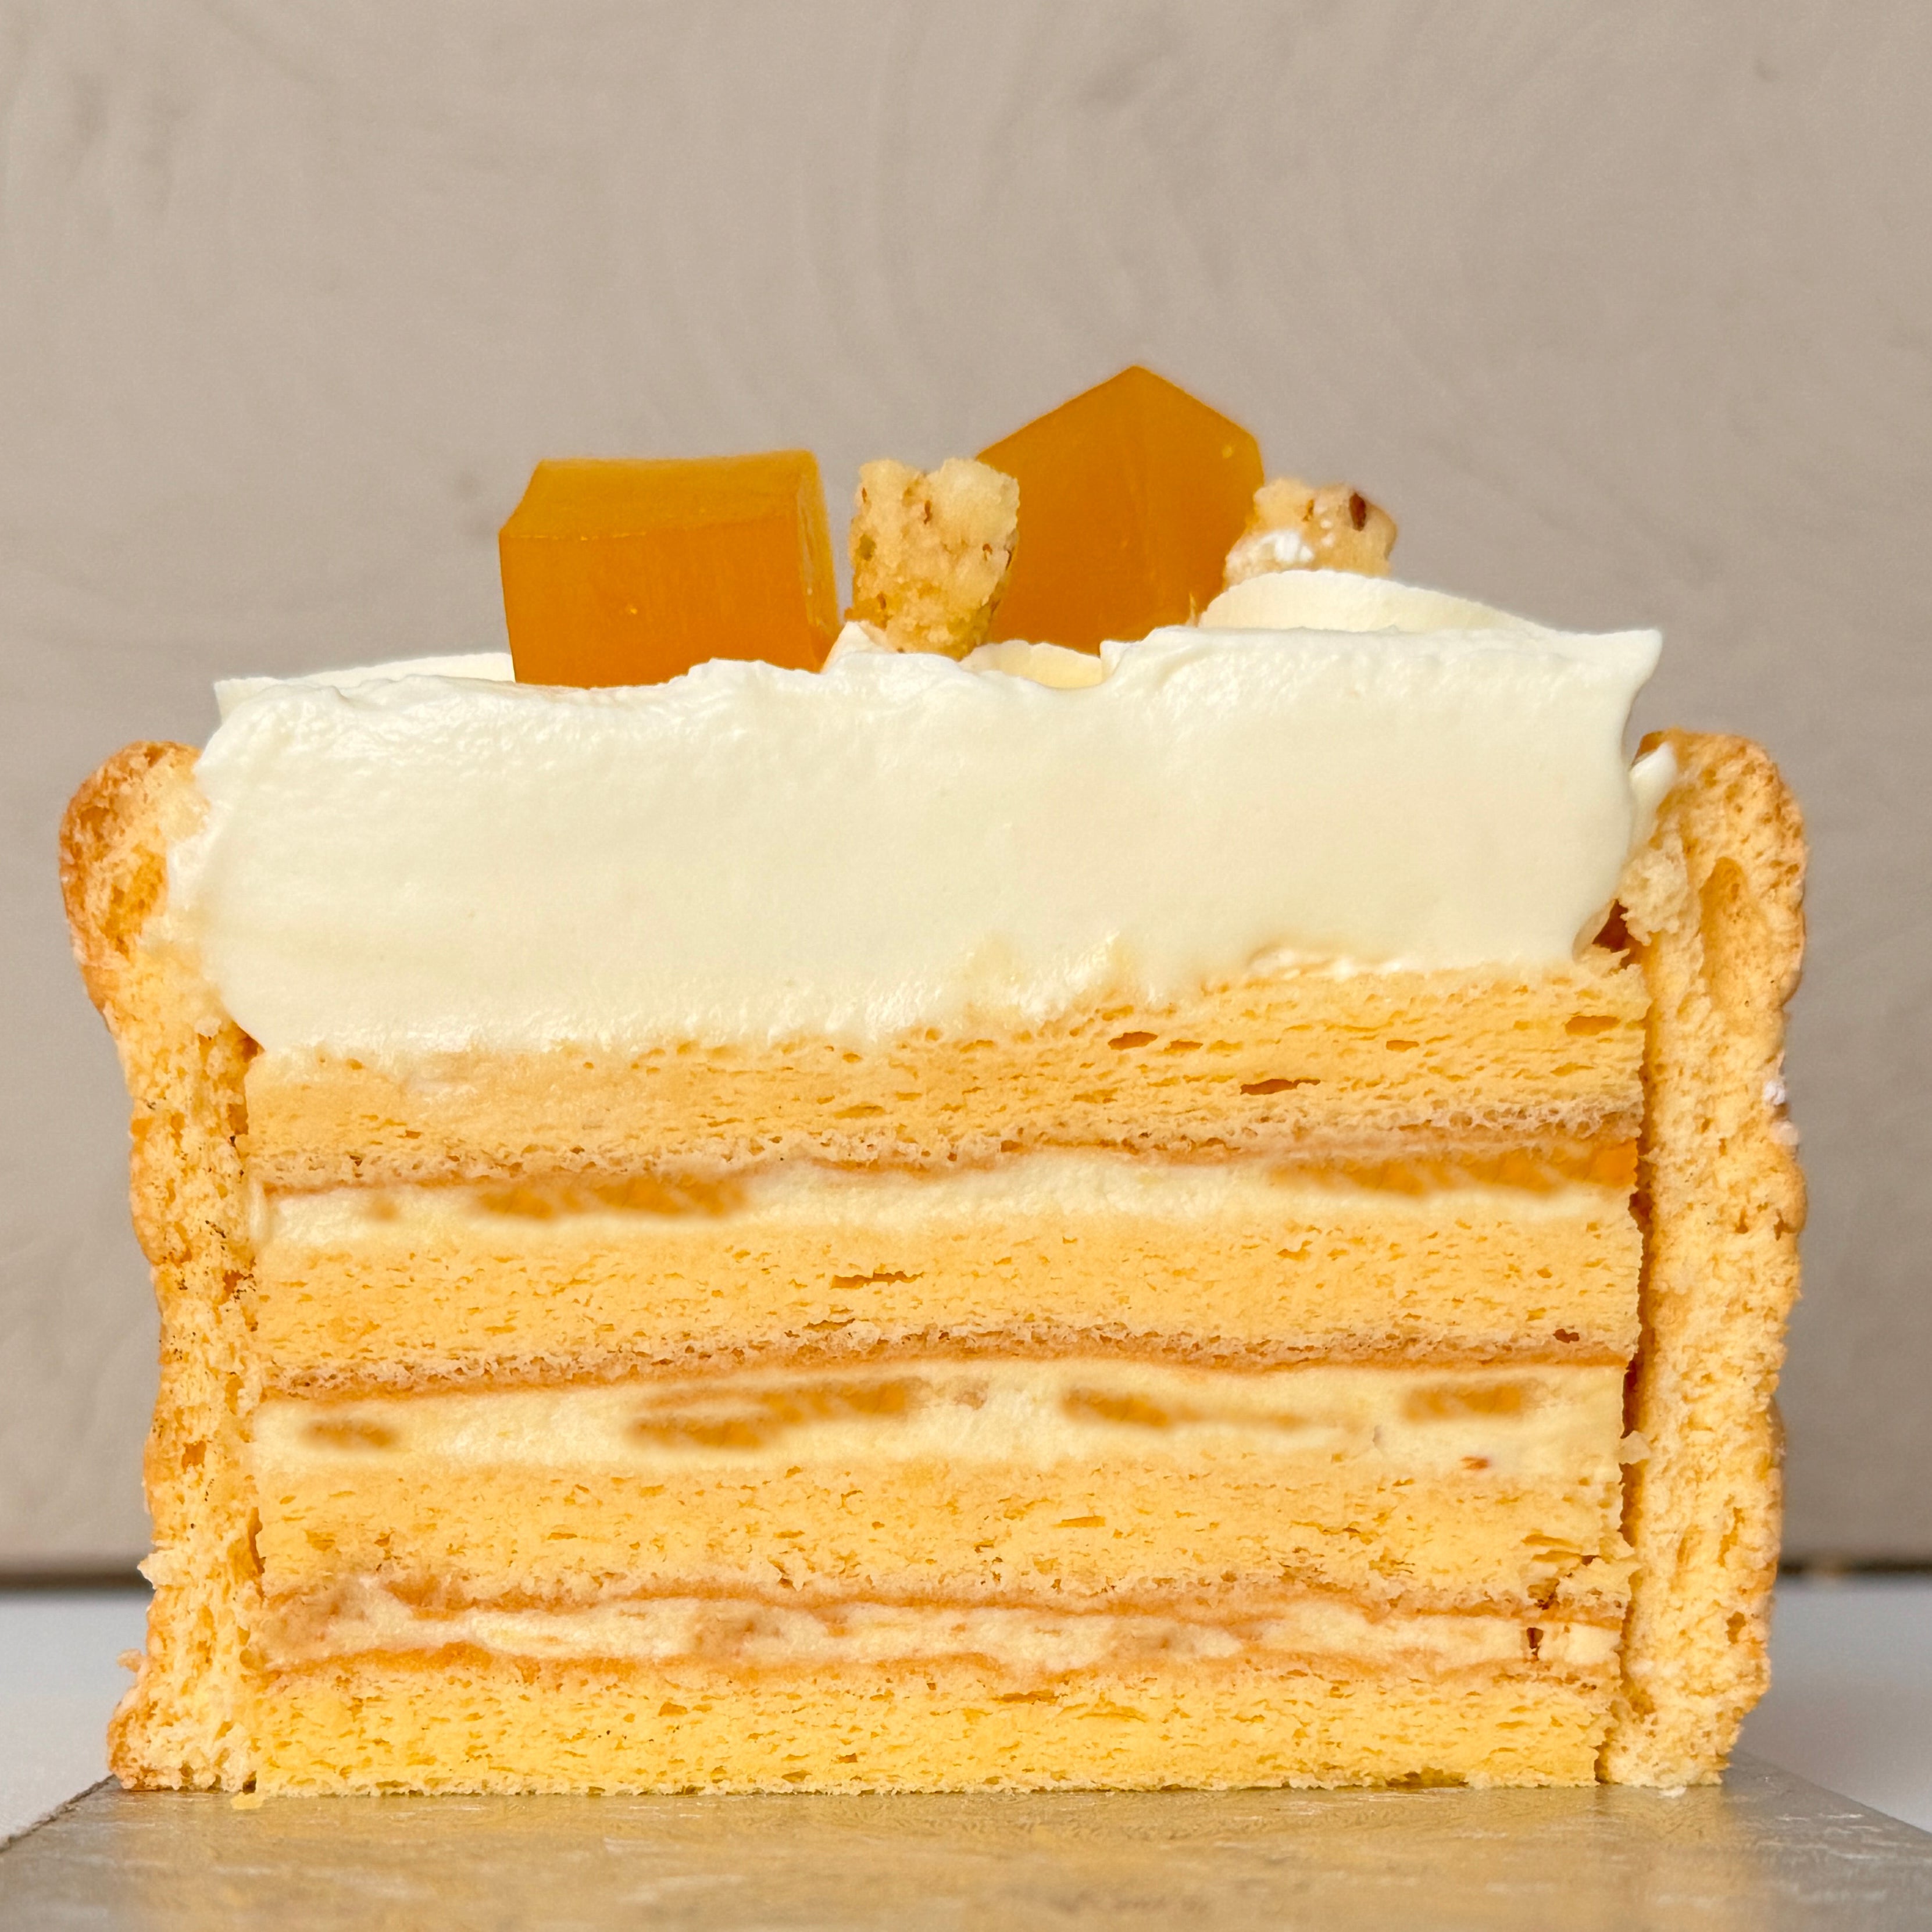 Cempedak Royale Cake (Available from 4-12 May)